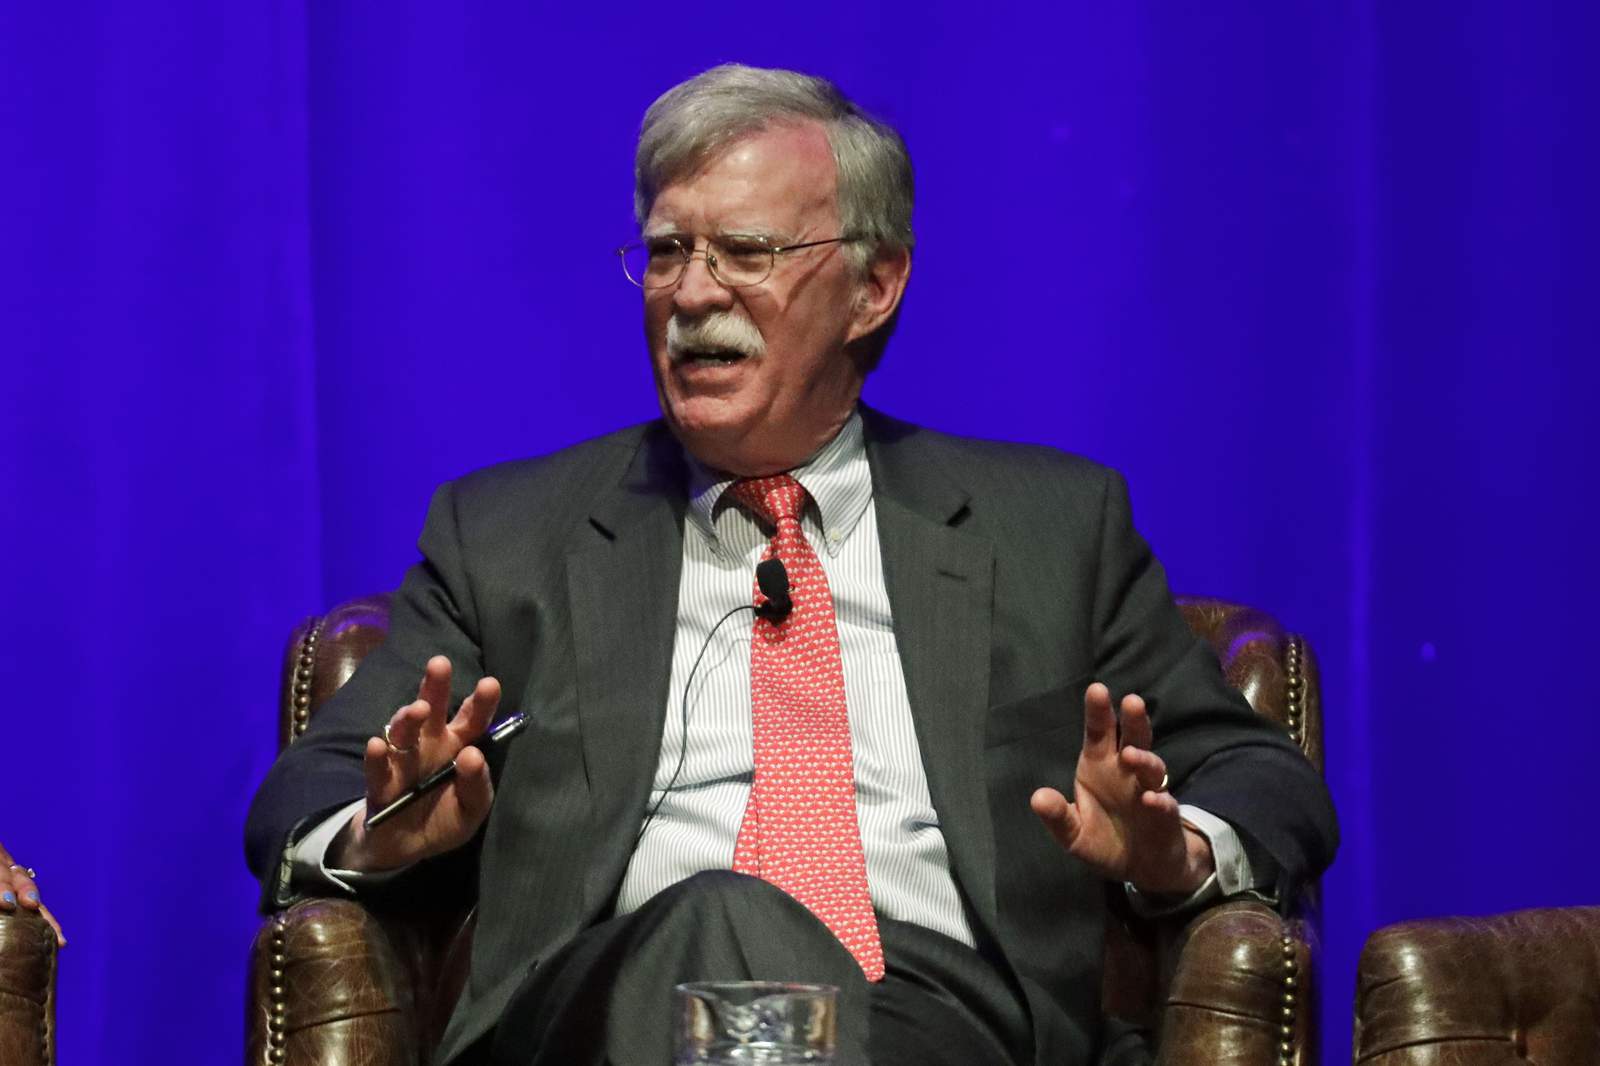 Bolton critique of Trump could define tell-all book battles